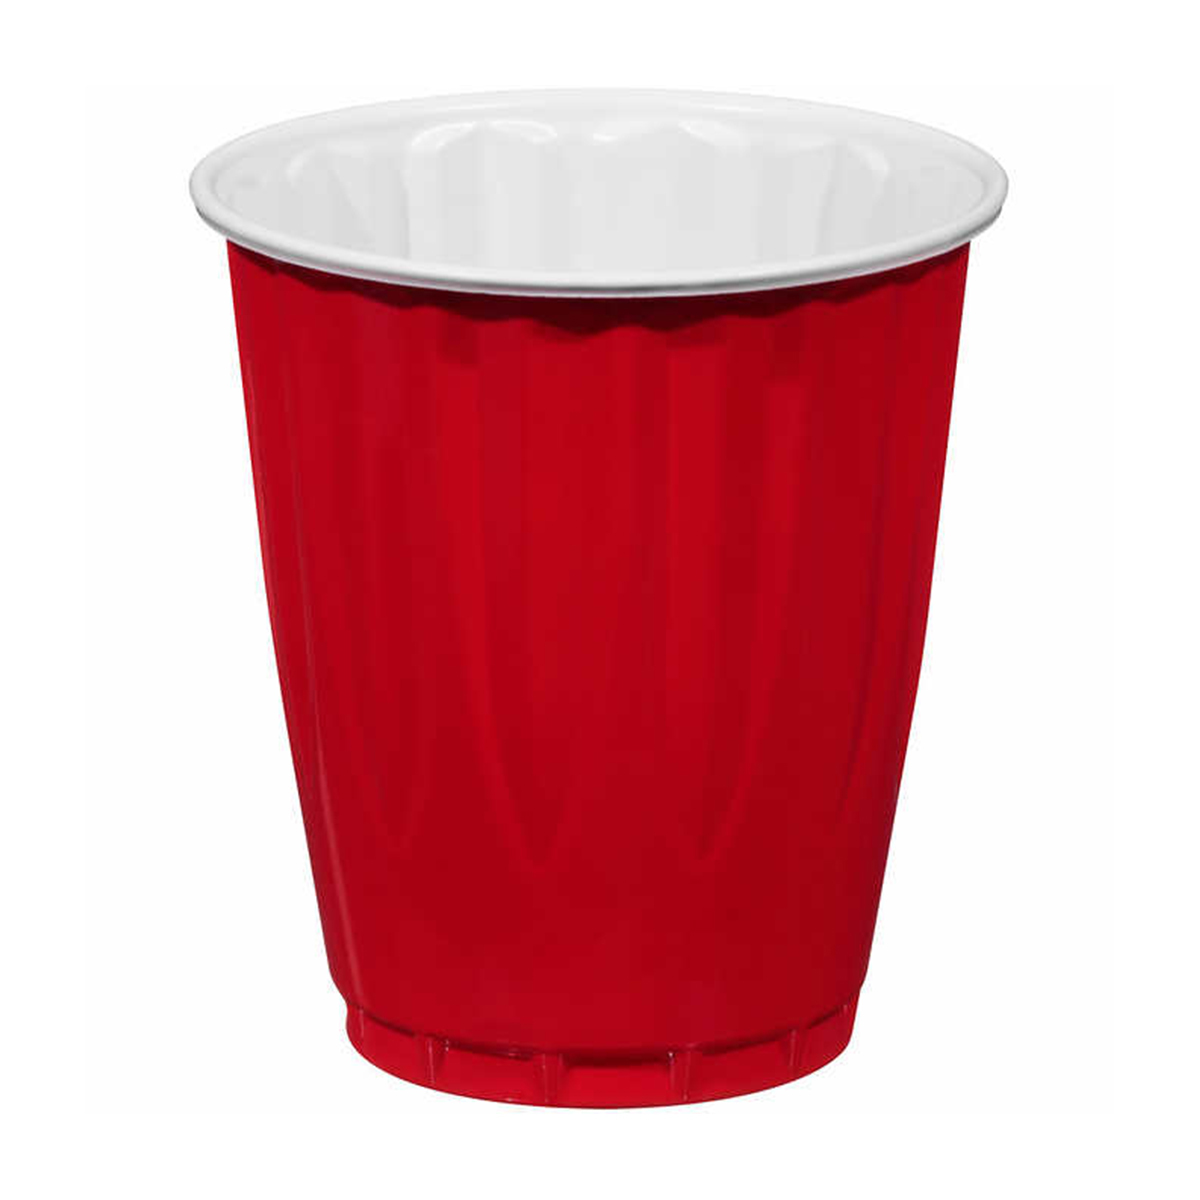 Kirkland Signature Chinet 18oz Red Plastic Cup, 240 Count